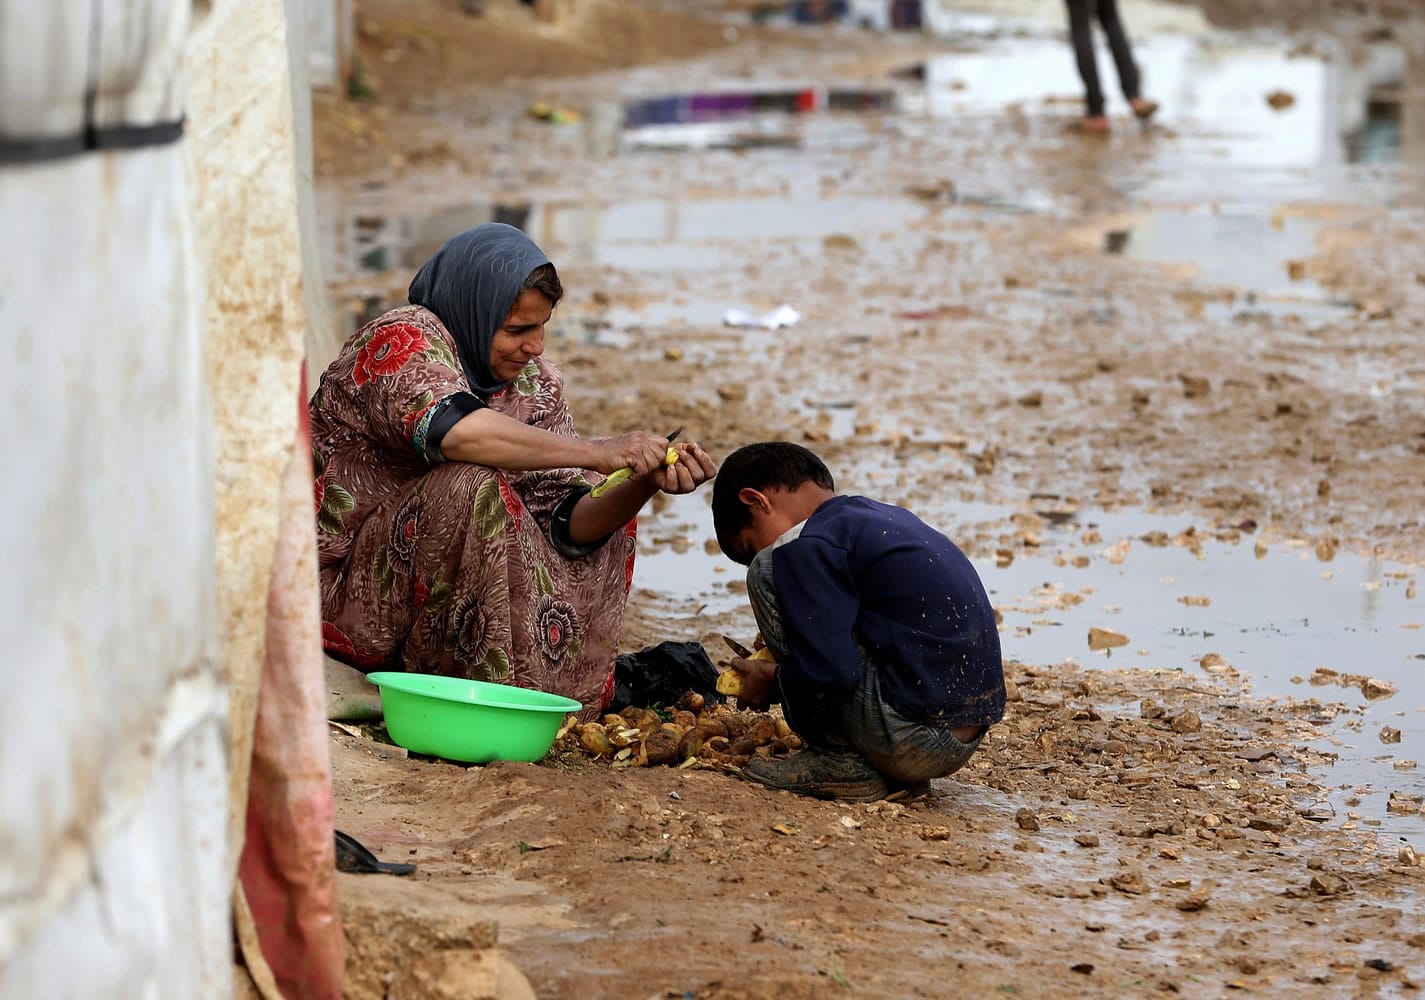 A Syrian refugee and her son peel potatoes outside their tent Tuesday at a refugee camp in the eastern Lebanese town of Al-Faour, near the border with Syria.